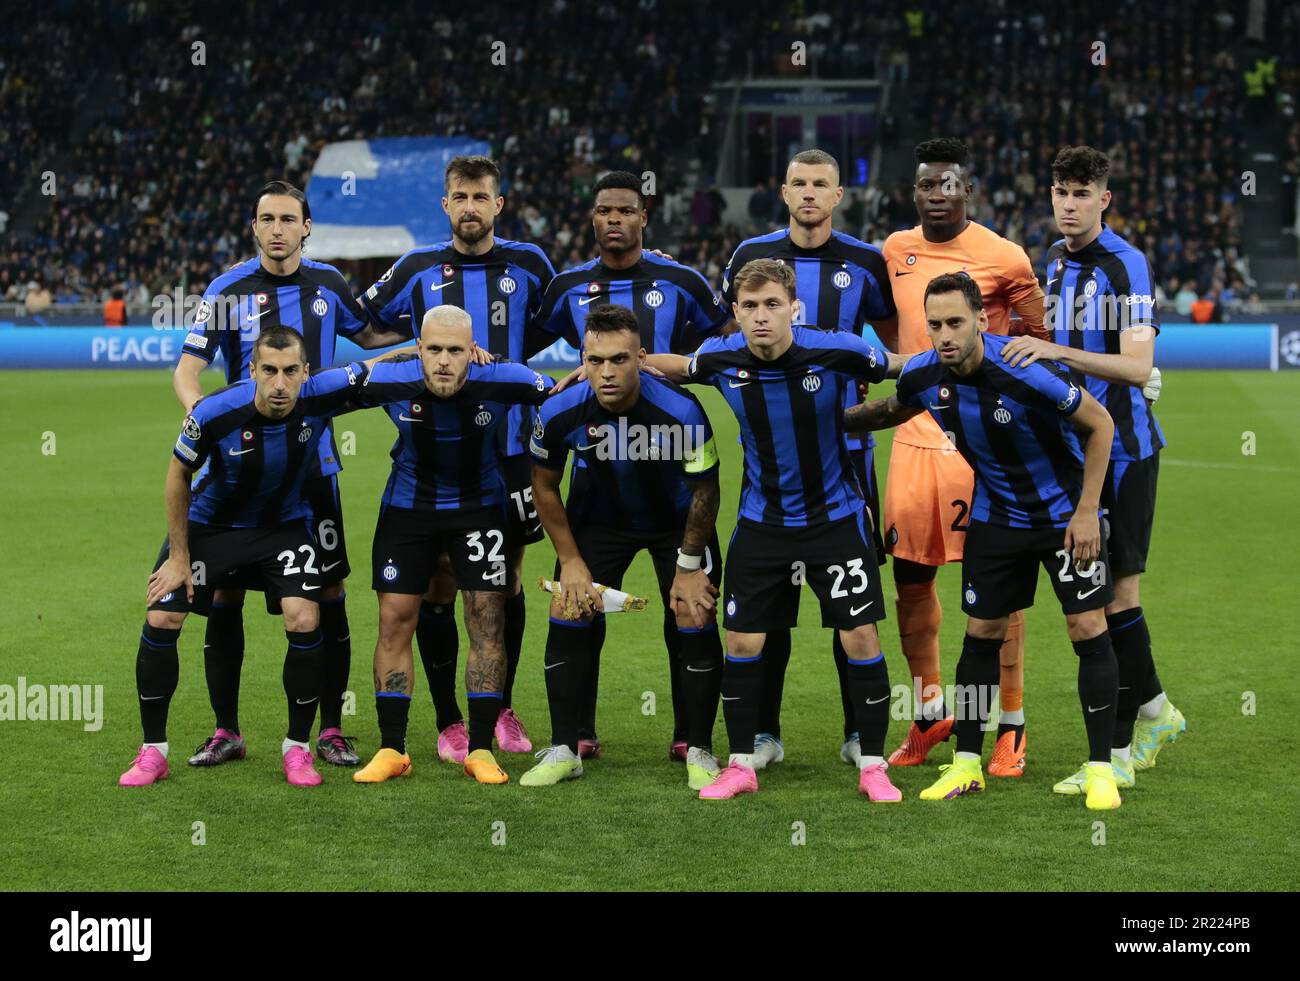 Coppa Italia 2023-24 bracket could pit Milan against Inter in semi-finals -  photo